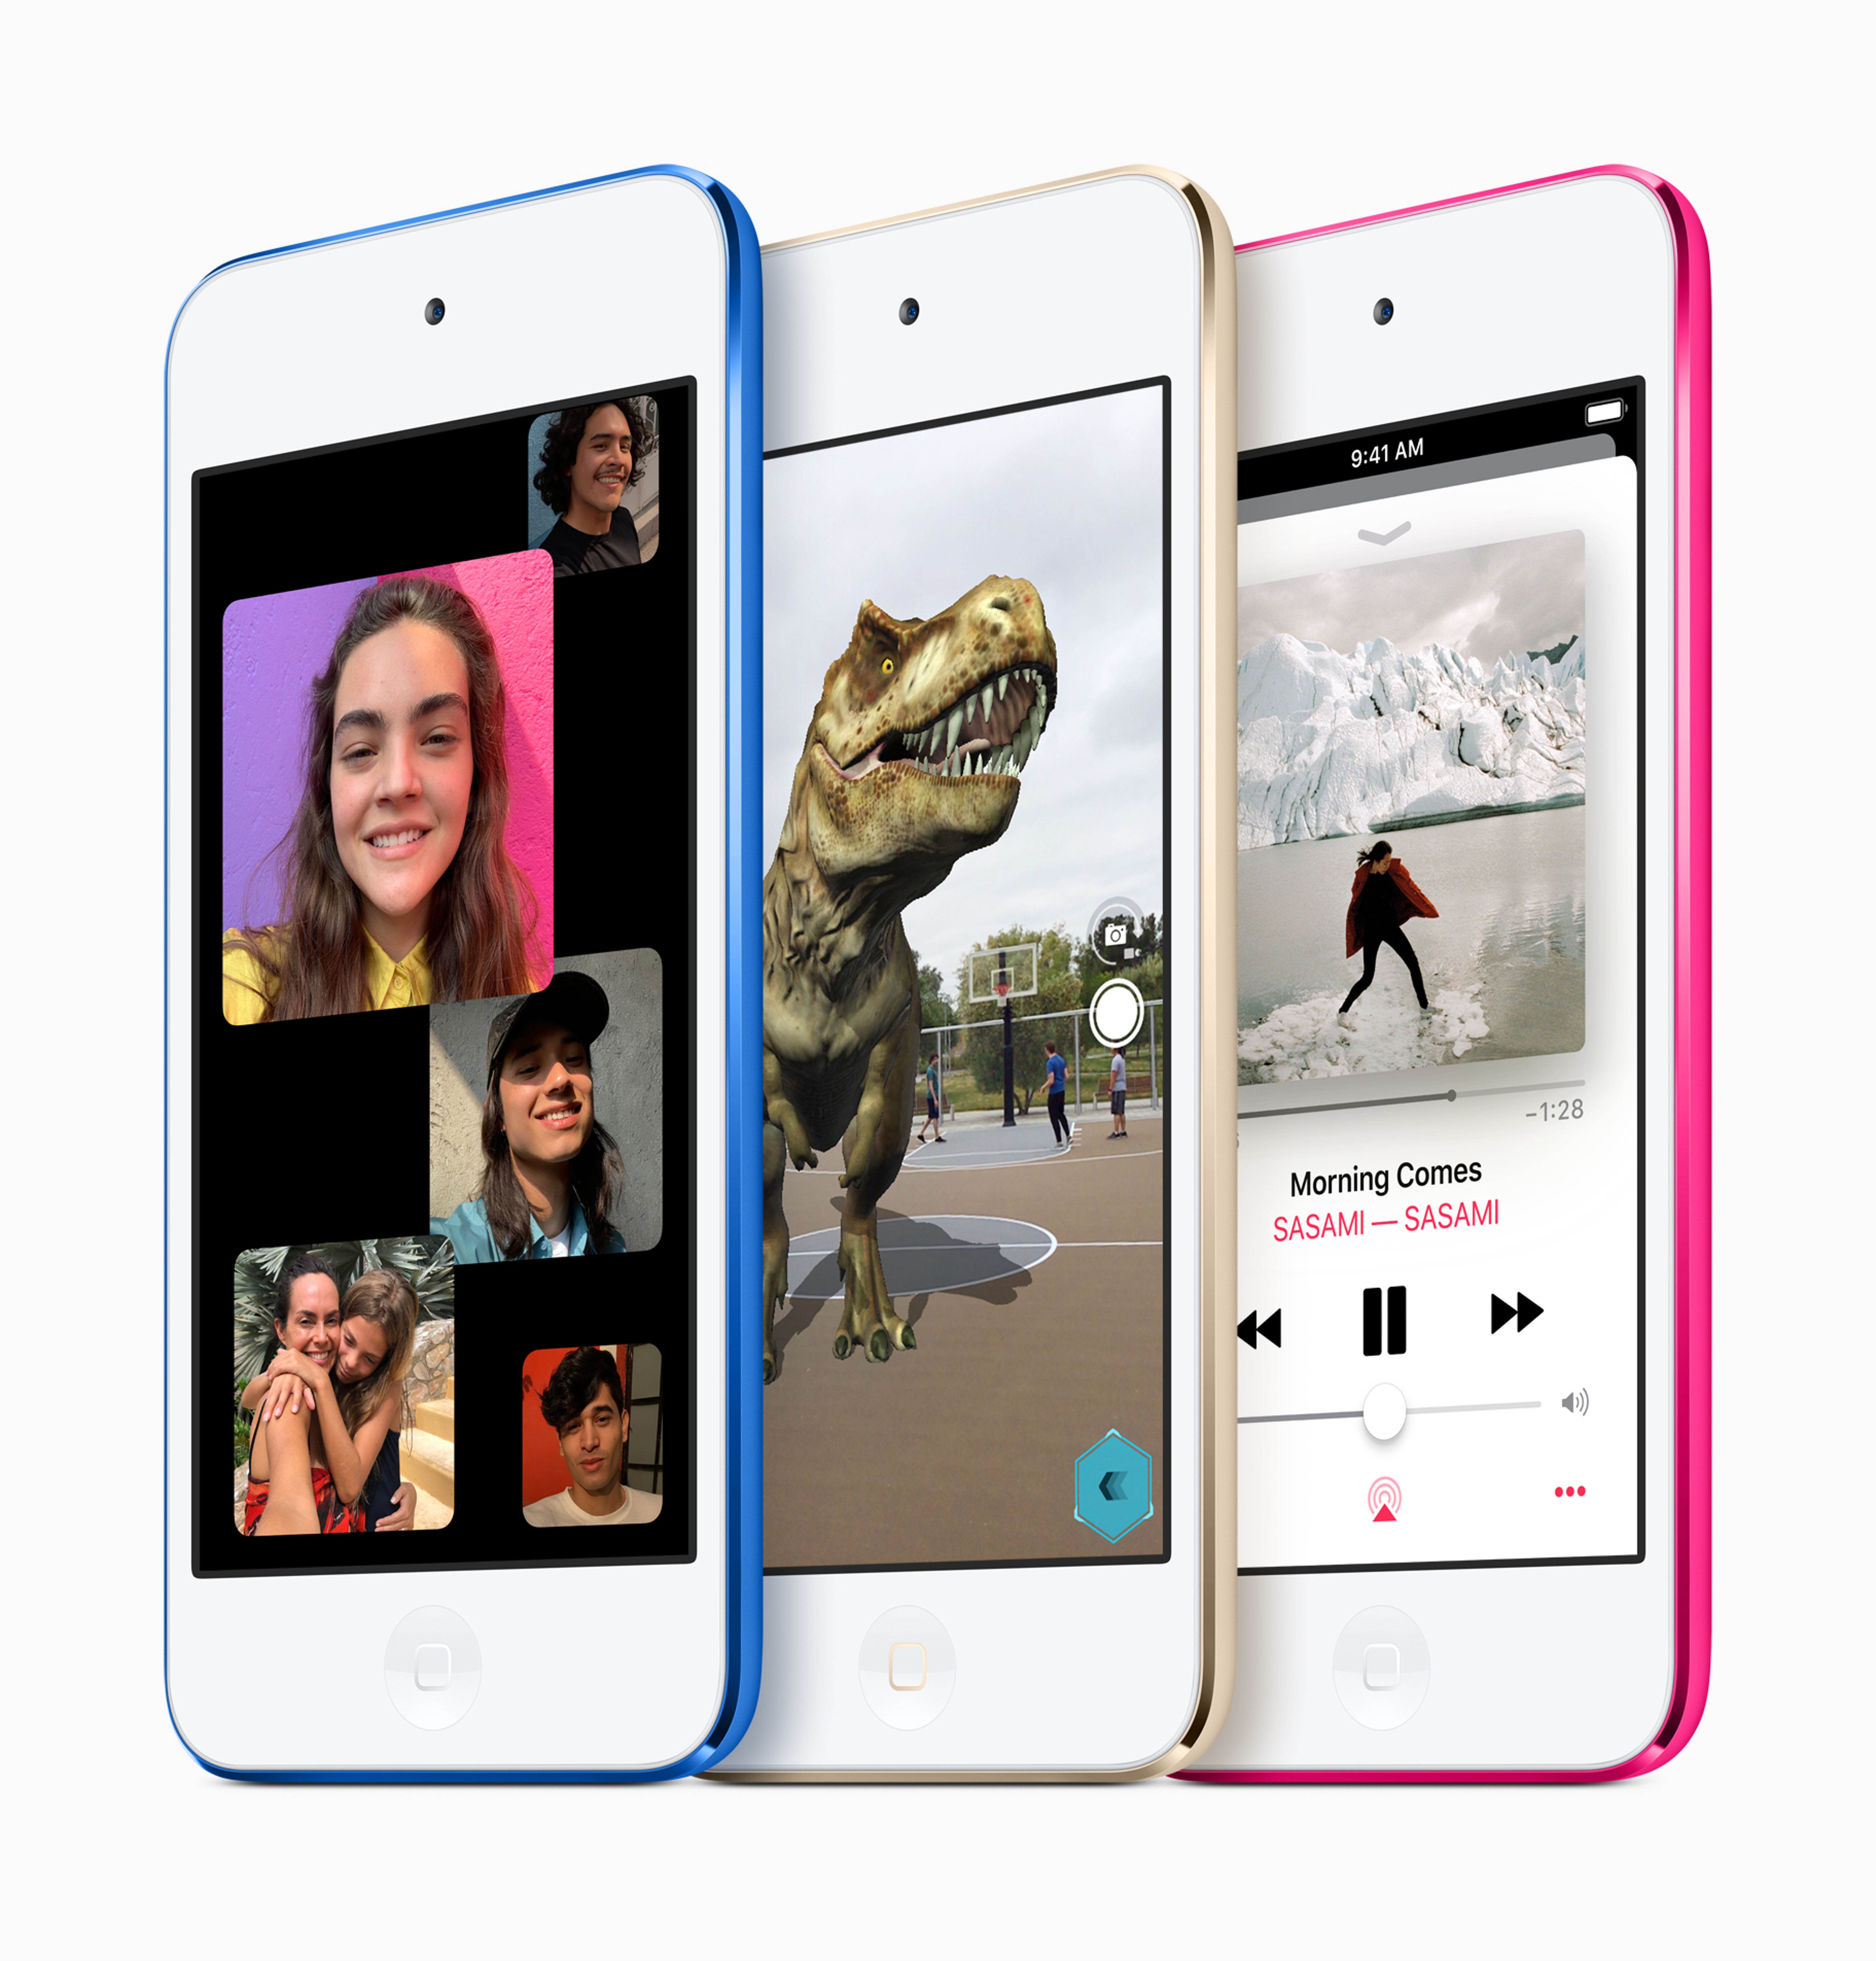 Apple Launches New iPod Touch